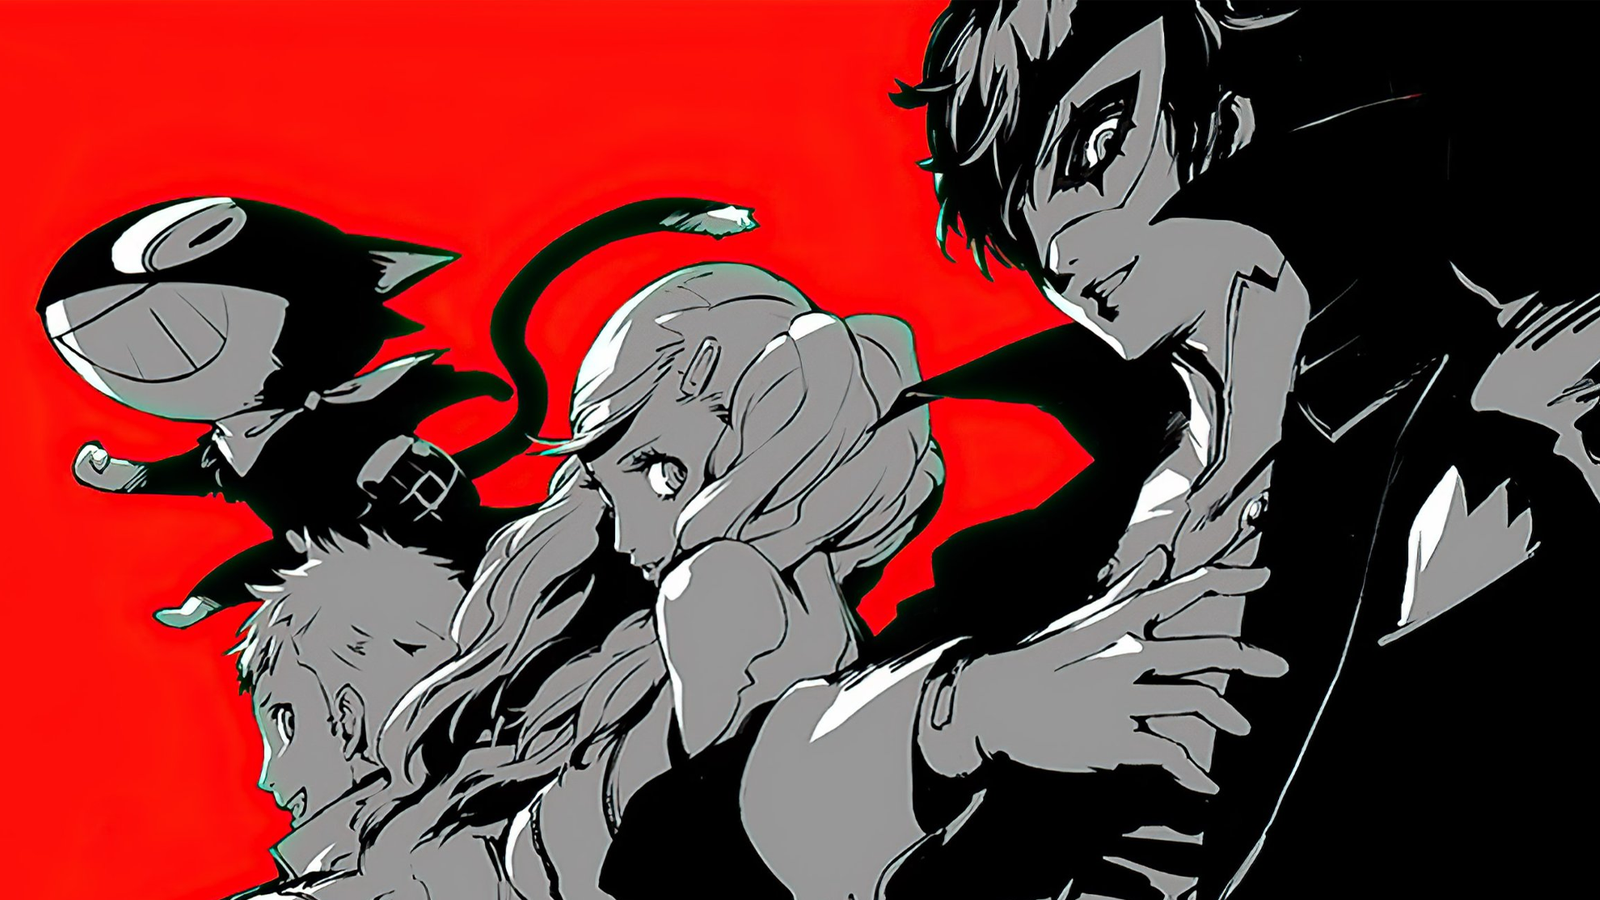 Persona 5 card game is coming to steal your heart (and money) next